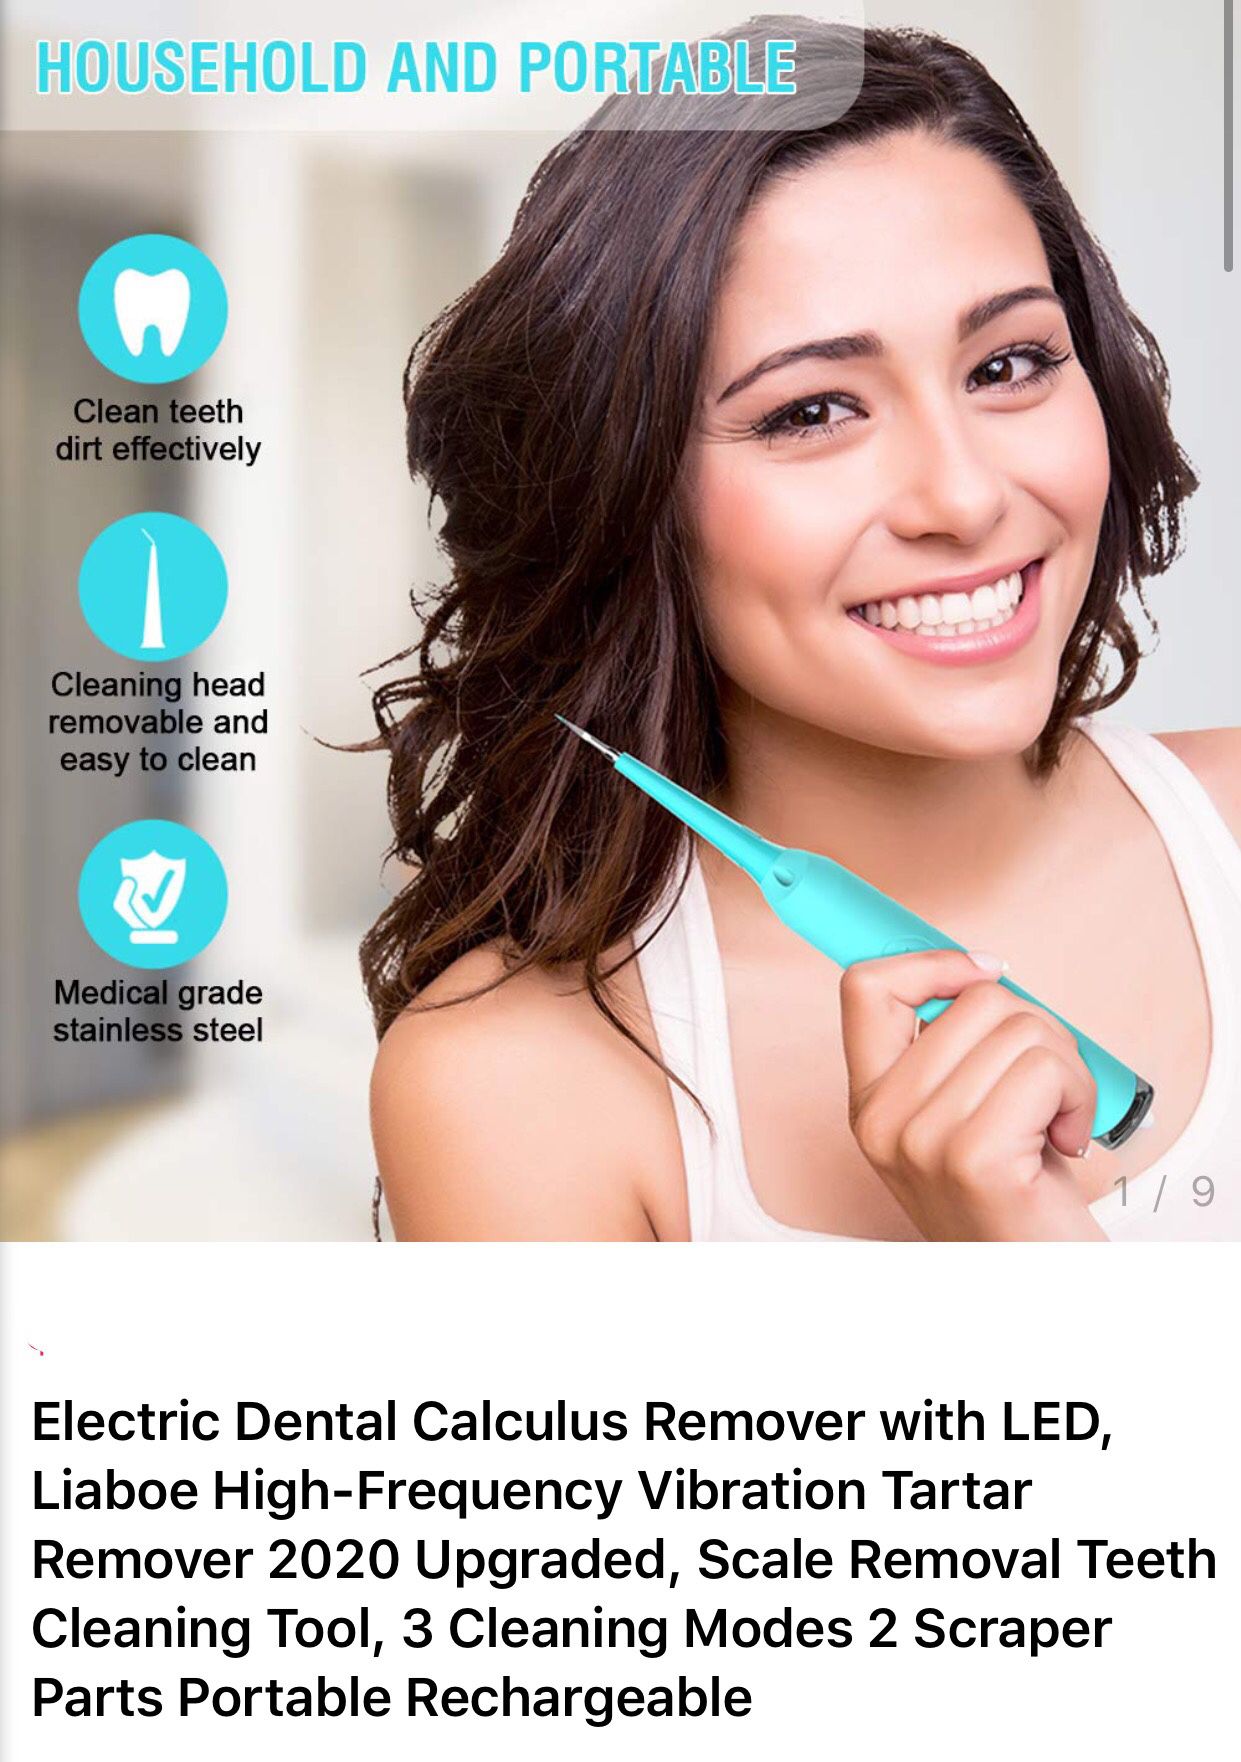 Electric tooth cleaning calculus remover with LED